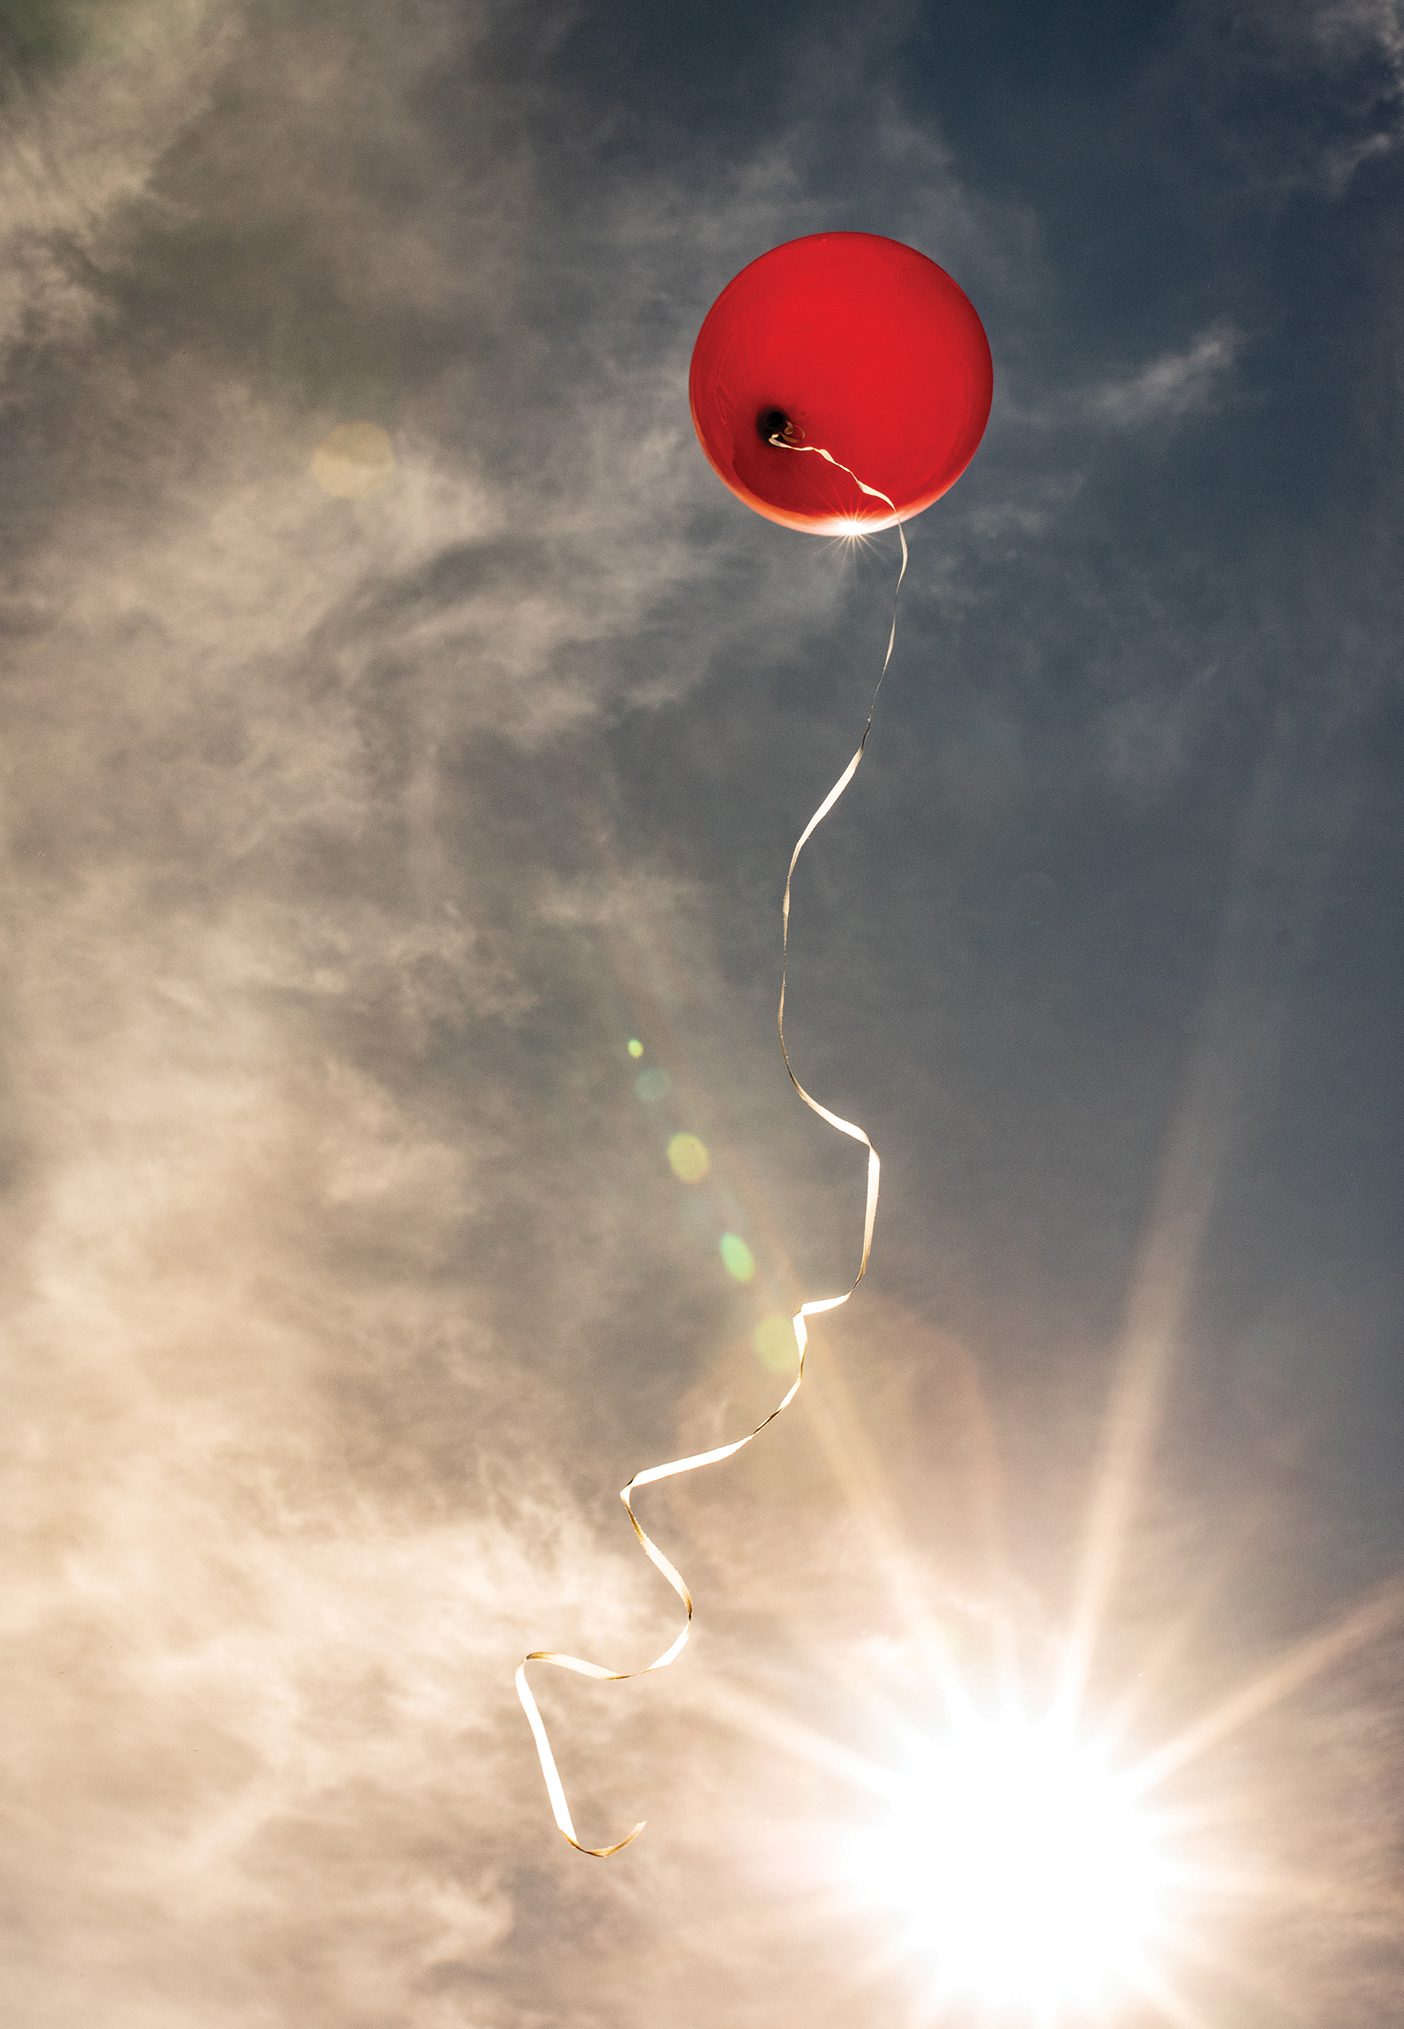 A red balloon with a string attached ascends into a sunlit but cloudy sky.